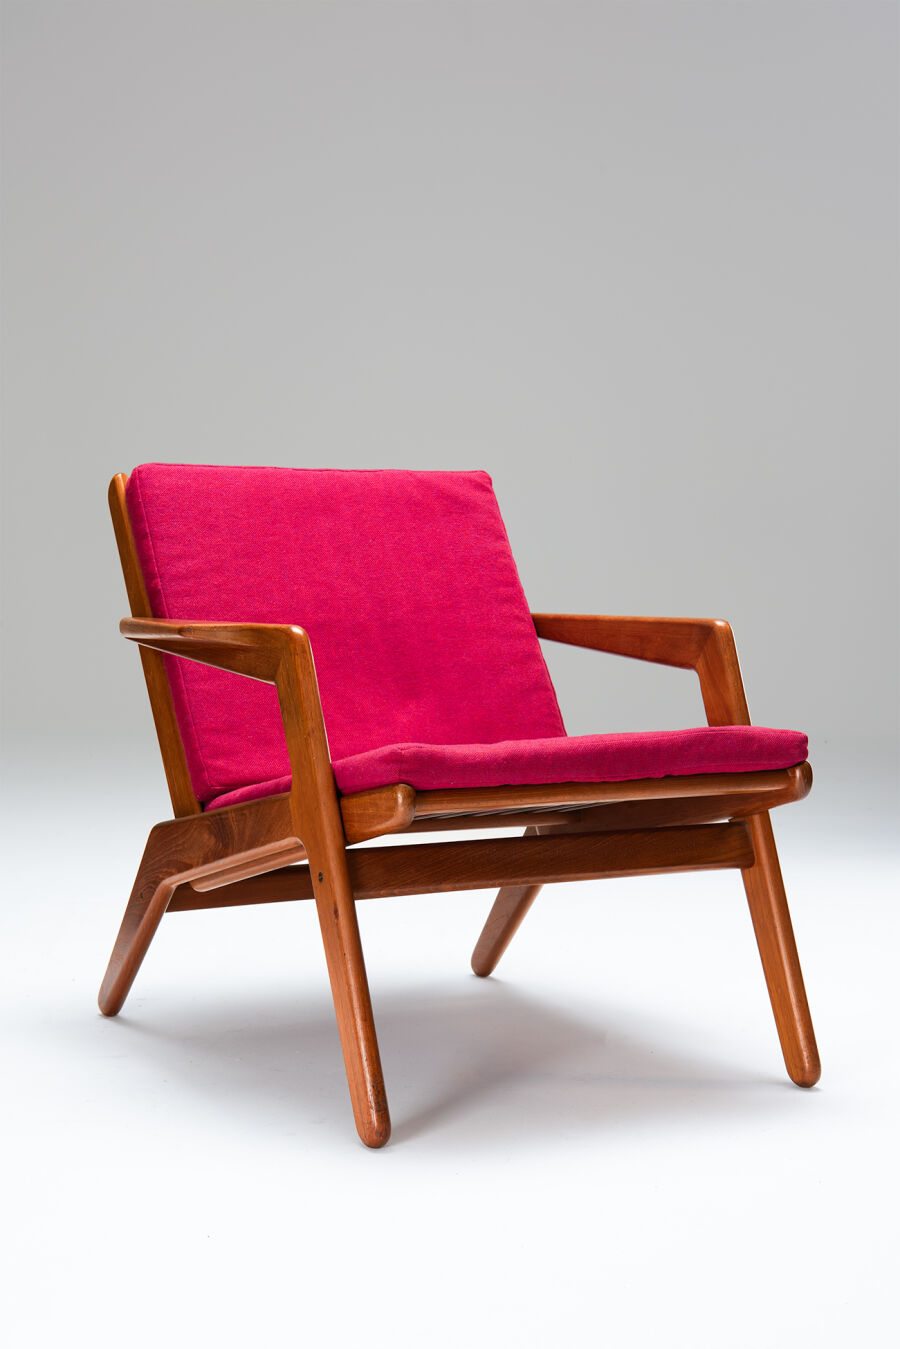 pair-of-armchairs-50s1